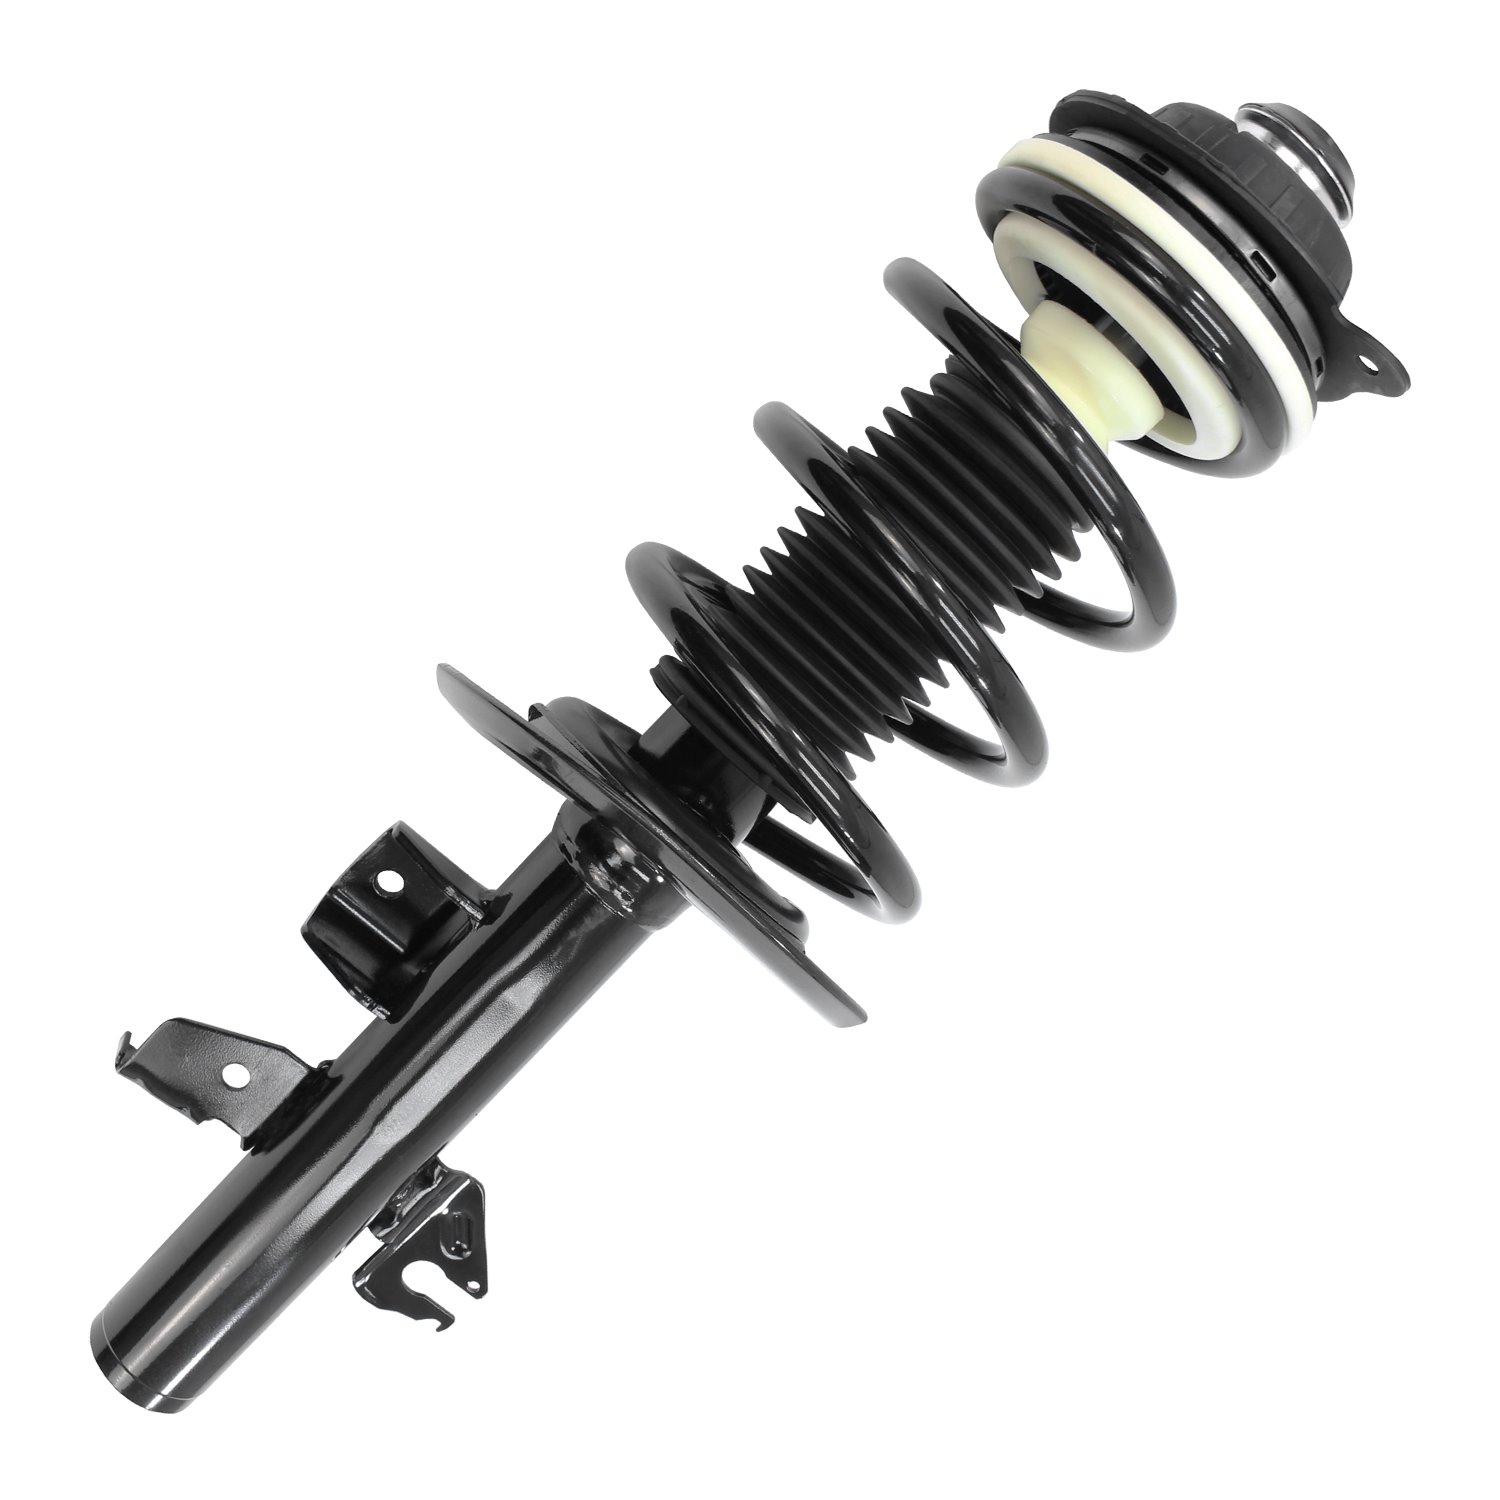 13614 Front Suspension Strut & Coil Spring Assemby Fits Select Jeep Cherokee